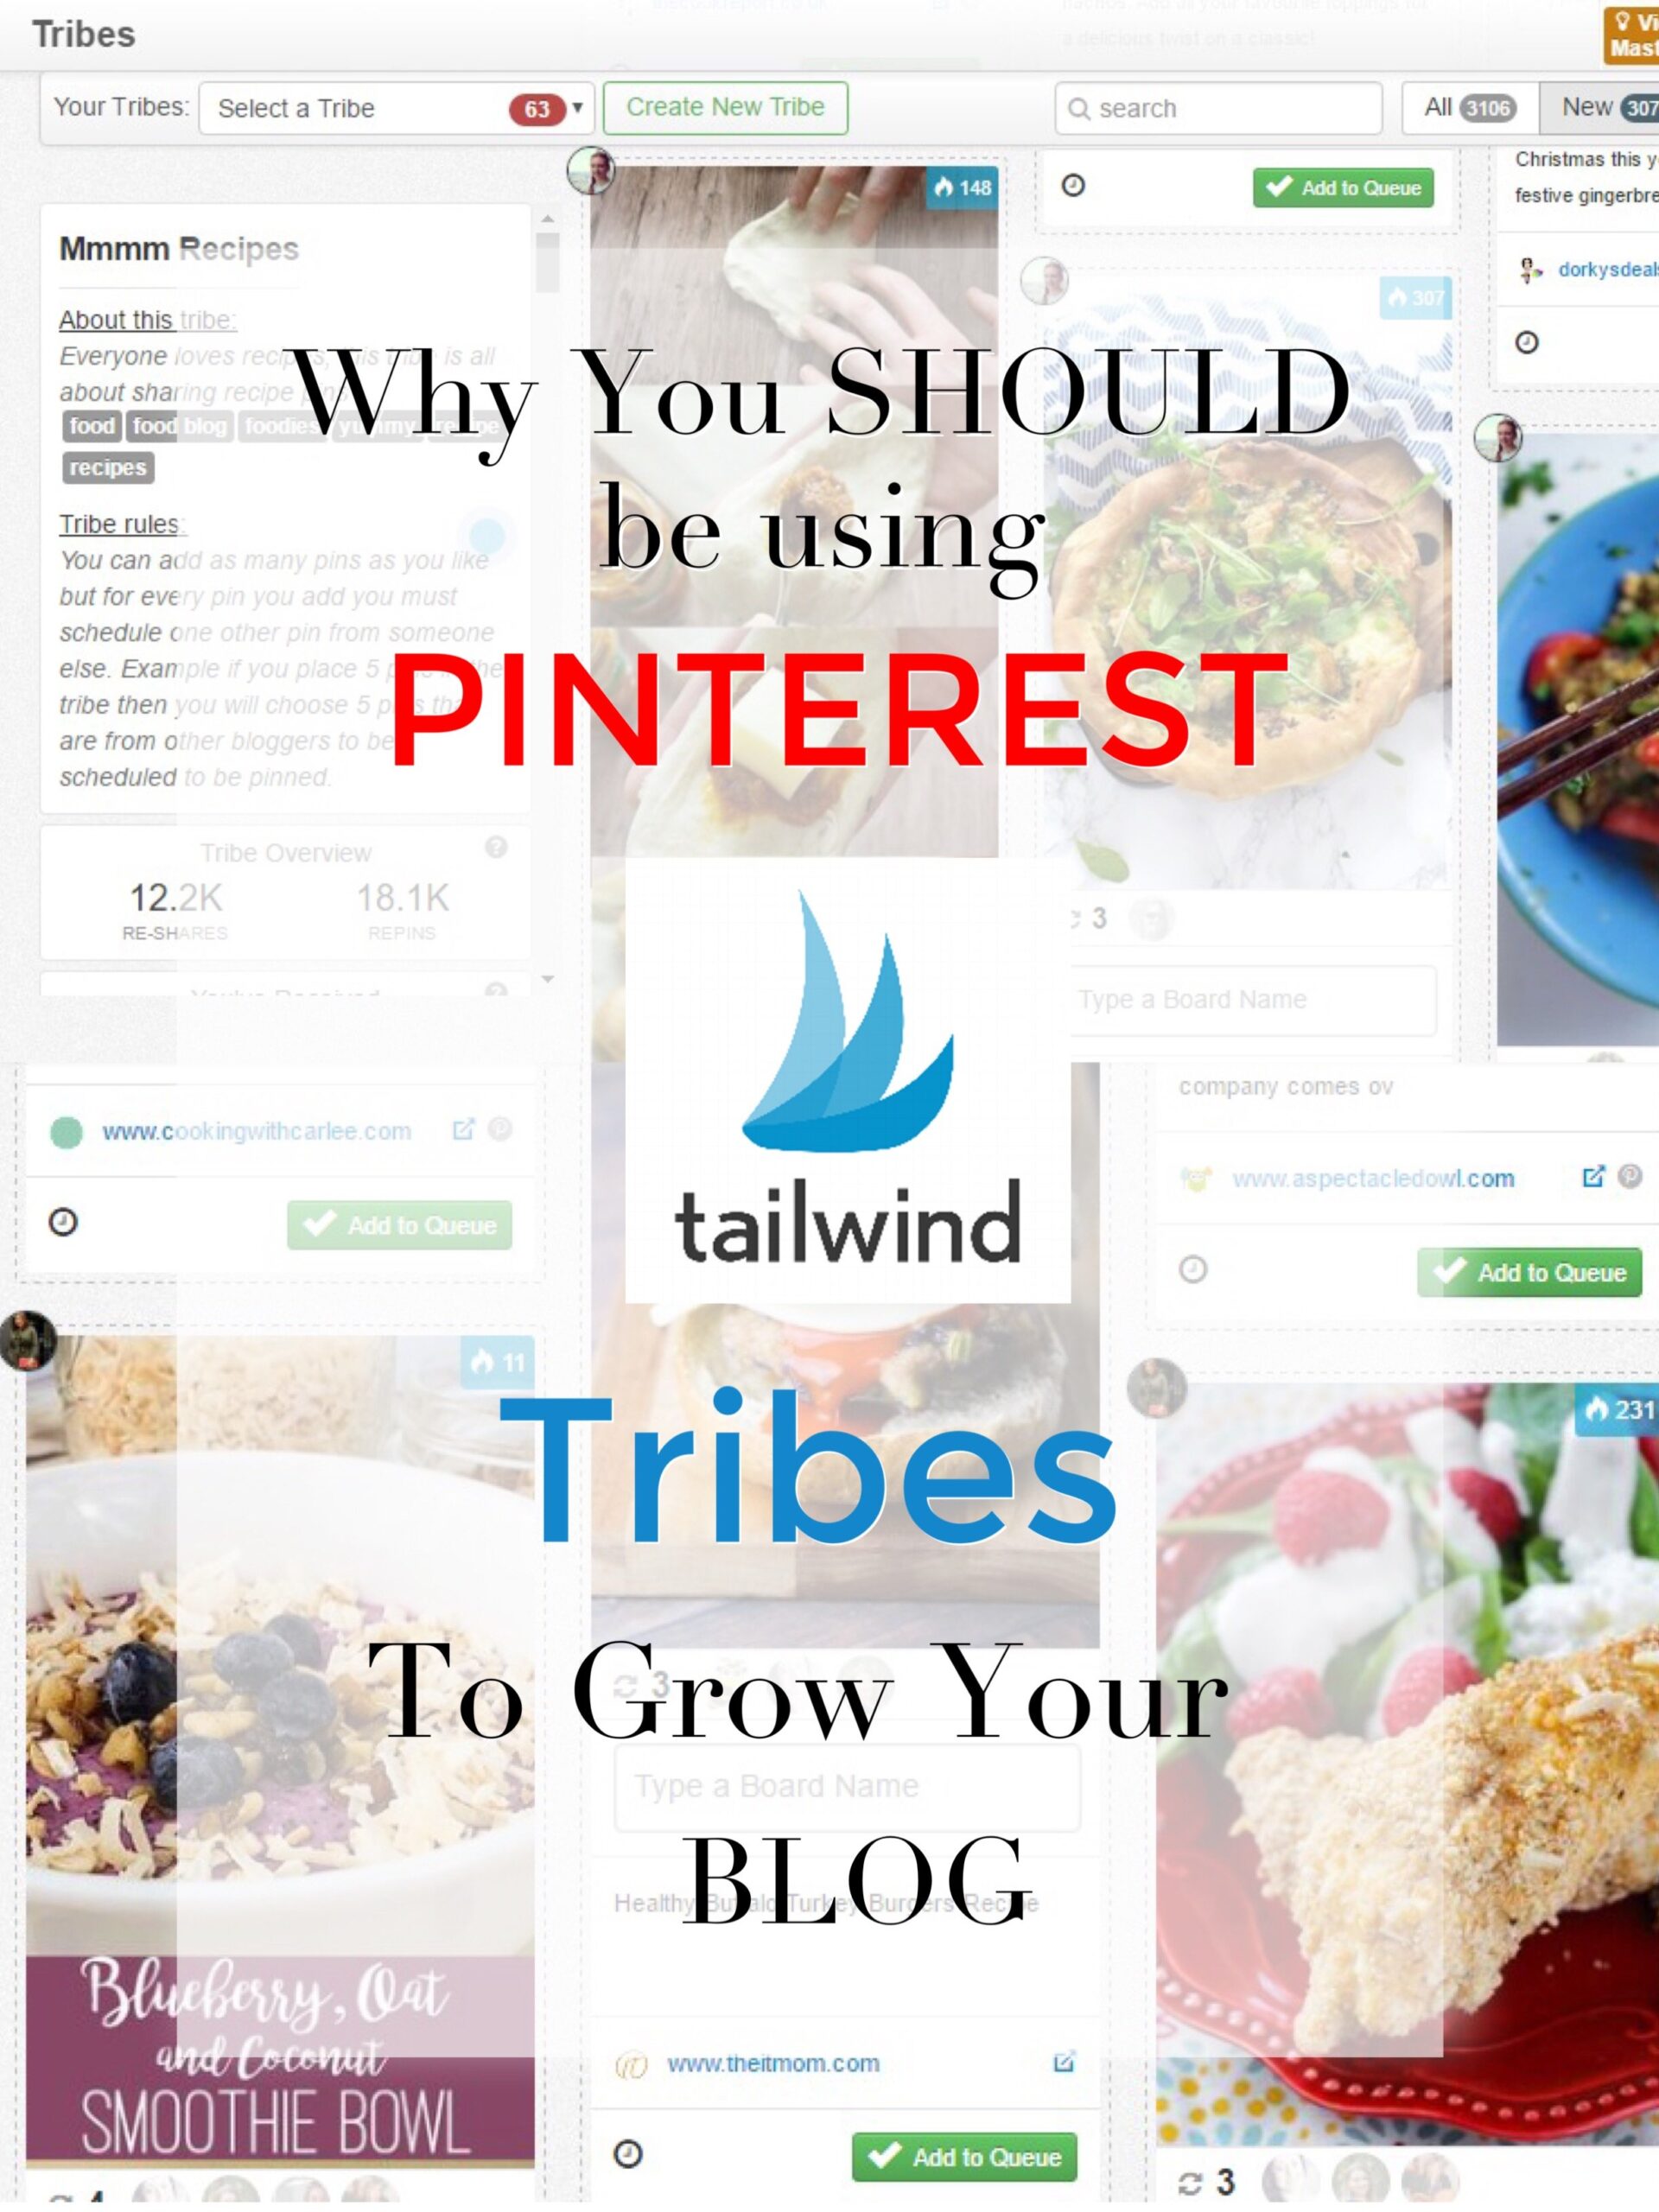 Why You Should Start Using Tailwind Pinterest Tribes to Grow Your Blog